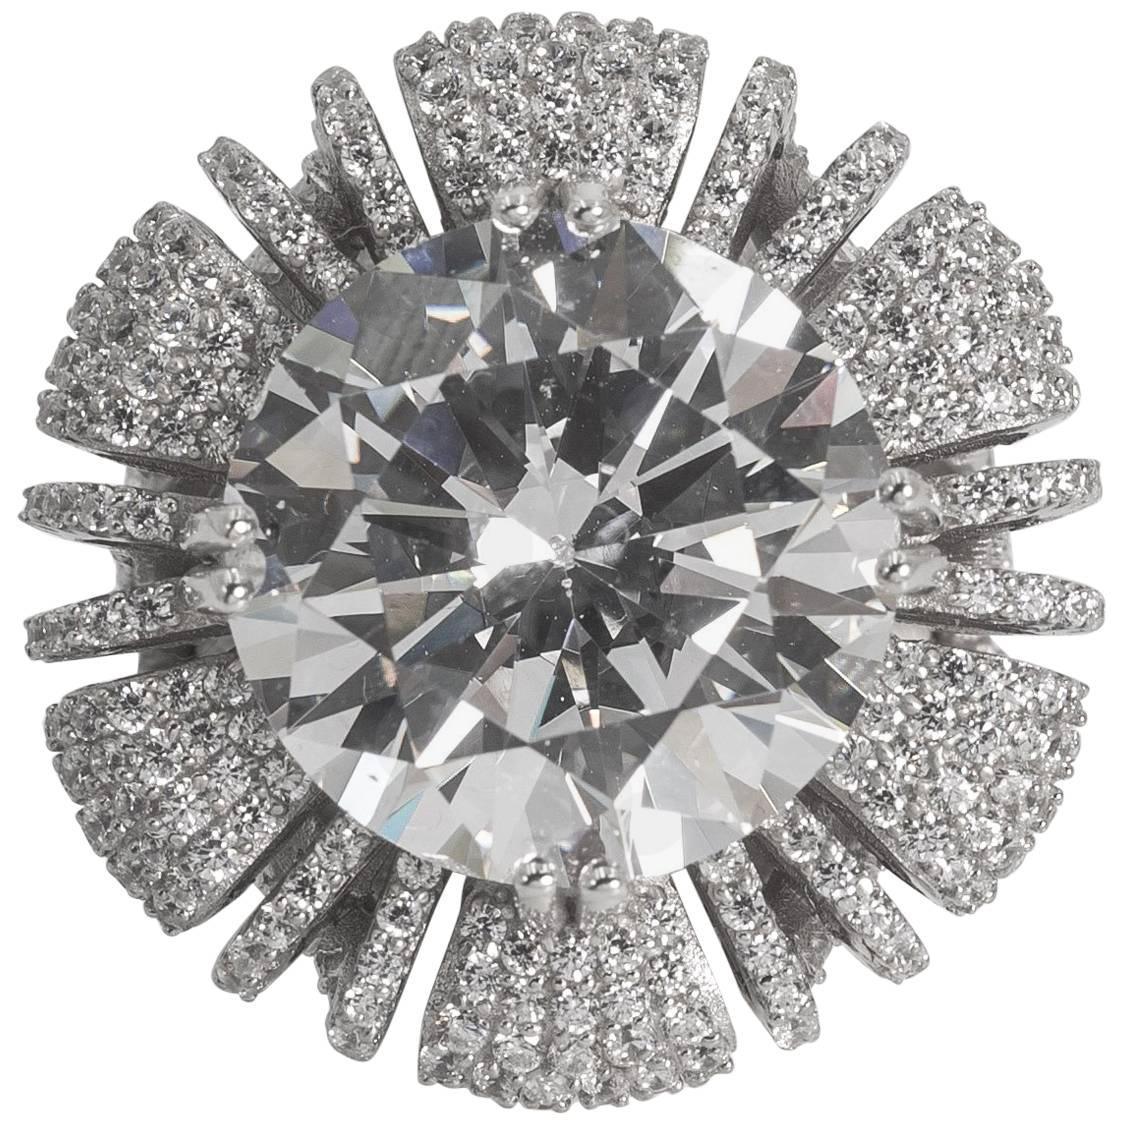 A 15 carat hand special cut round sharp white cubic zirconia nestled on a cushion pave white faux diamonds set in sterling designed to the highest fine standards possible. A classic amazing sparkly and brilliant look that will last forever. Any size